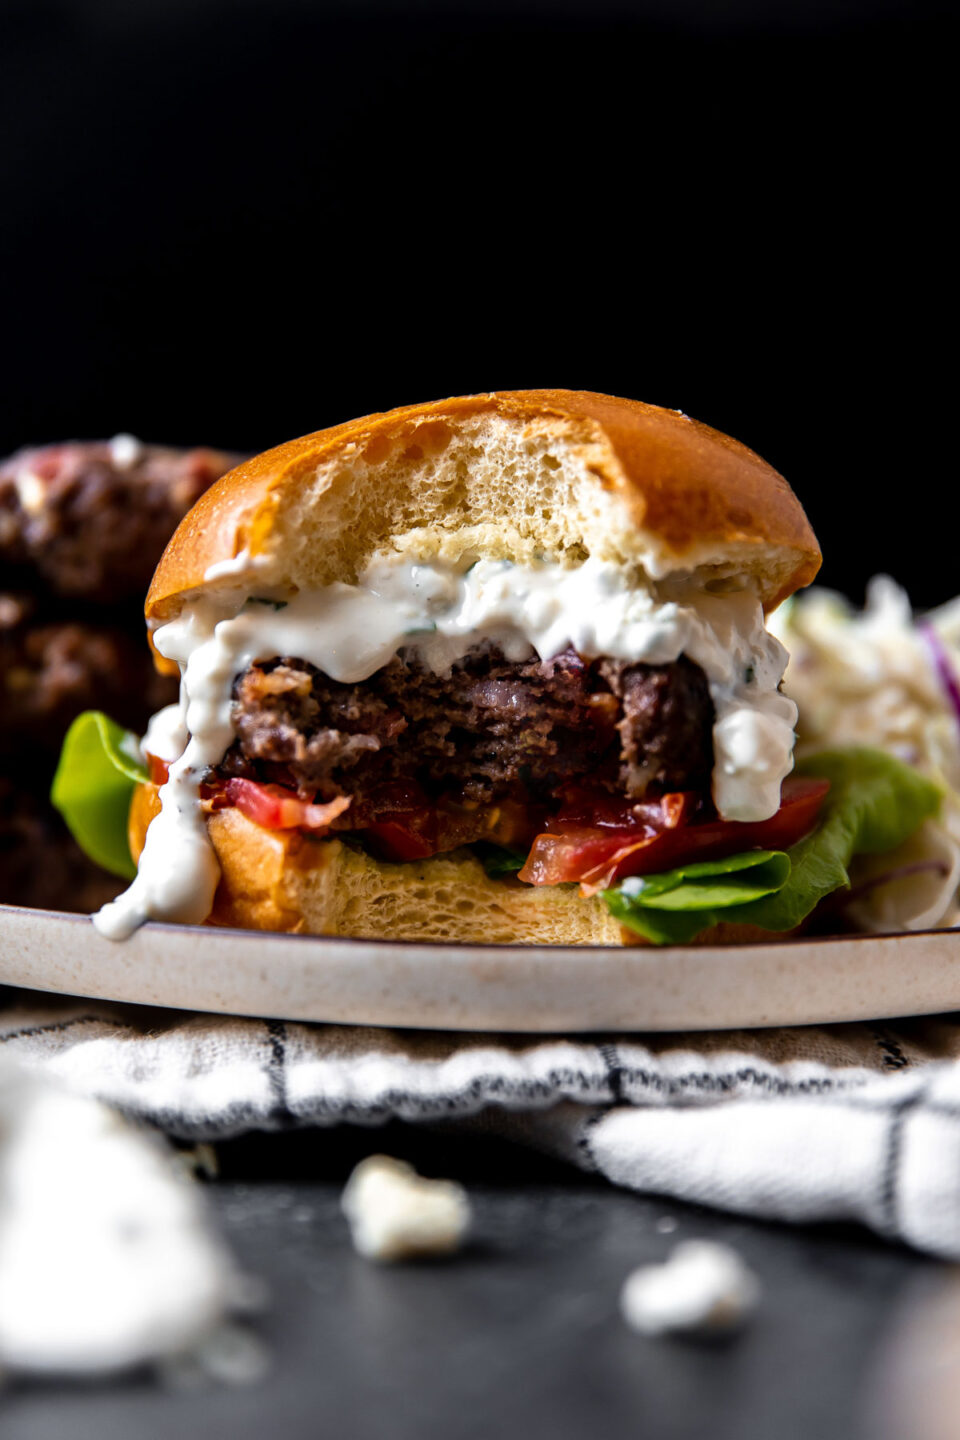 A side angle shot of a finished grilled blue cheese burger atop a plate with a large bite taken out of it. The plate sits atop a white and black window-pane patterned linen napkin that sits atop a dark gray textured surface. The burger is sandwiched between a burger bun with sliced tomato and lettuce sandwiched underneath and with creamy blue cheese sauce spooned over top the burger patty. Three burger patties and crunch apple slaw sit alongside the burger on the same plate.